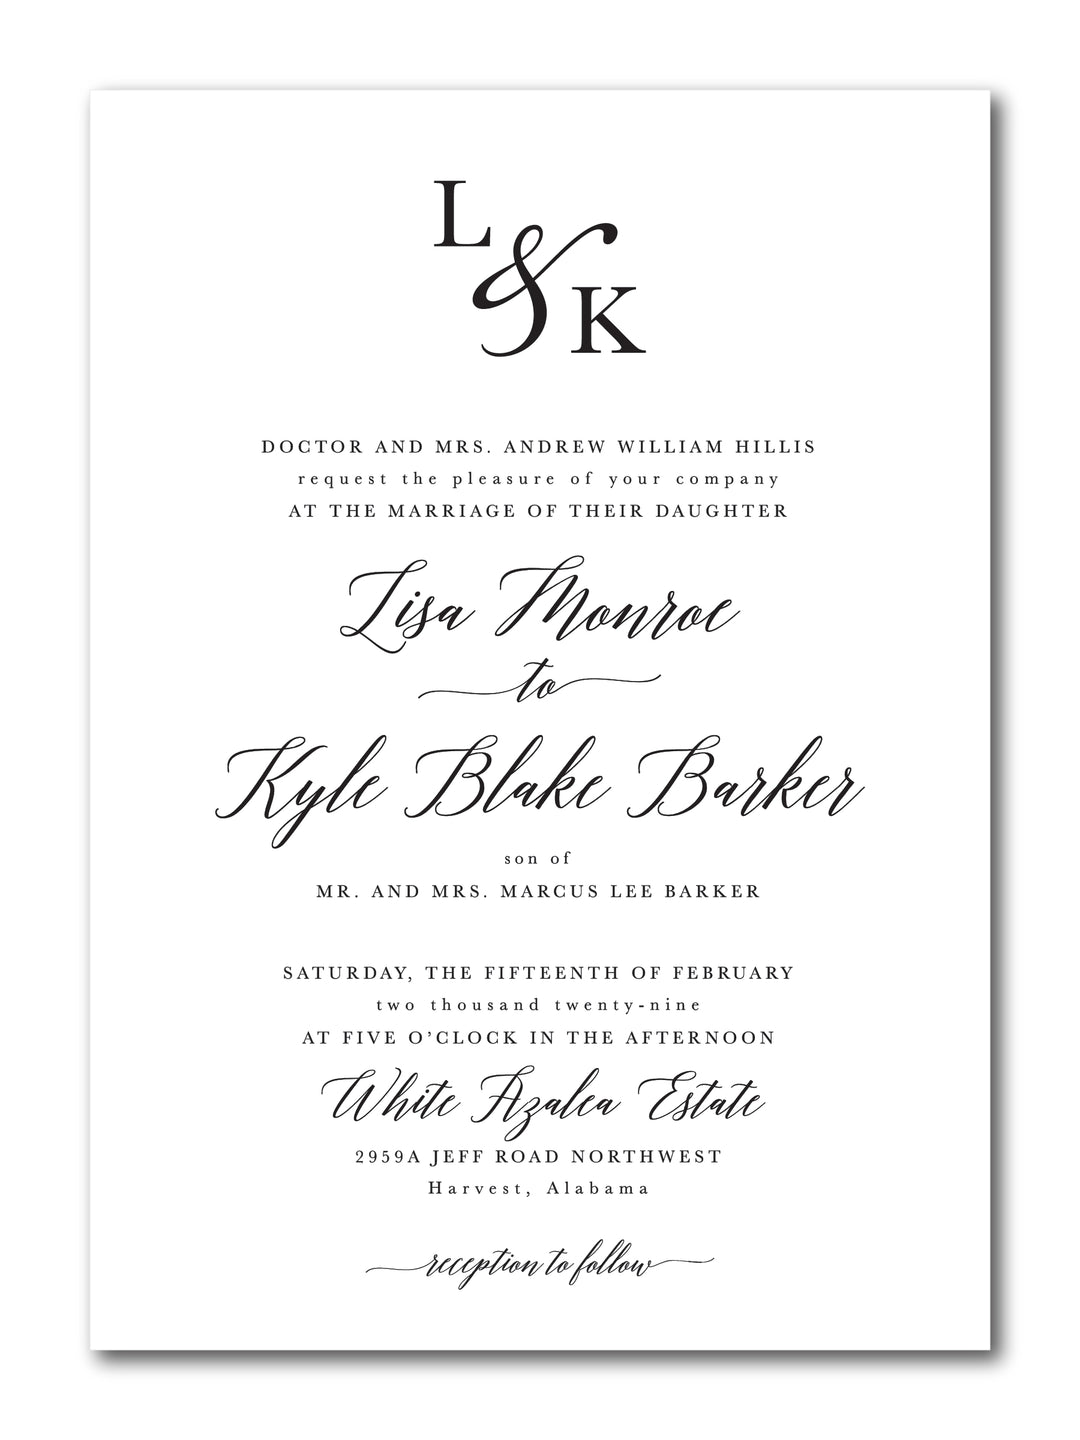 50 Wedding Invitation Cards size 5X7 Printed in Black with Envelopes